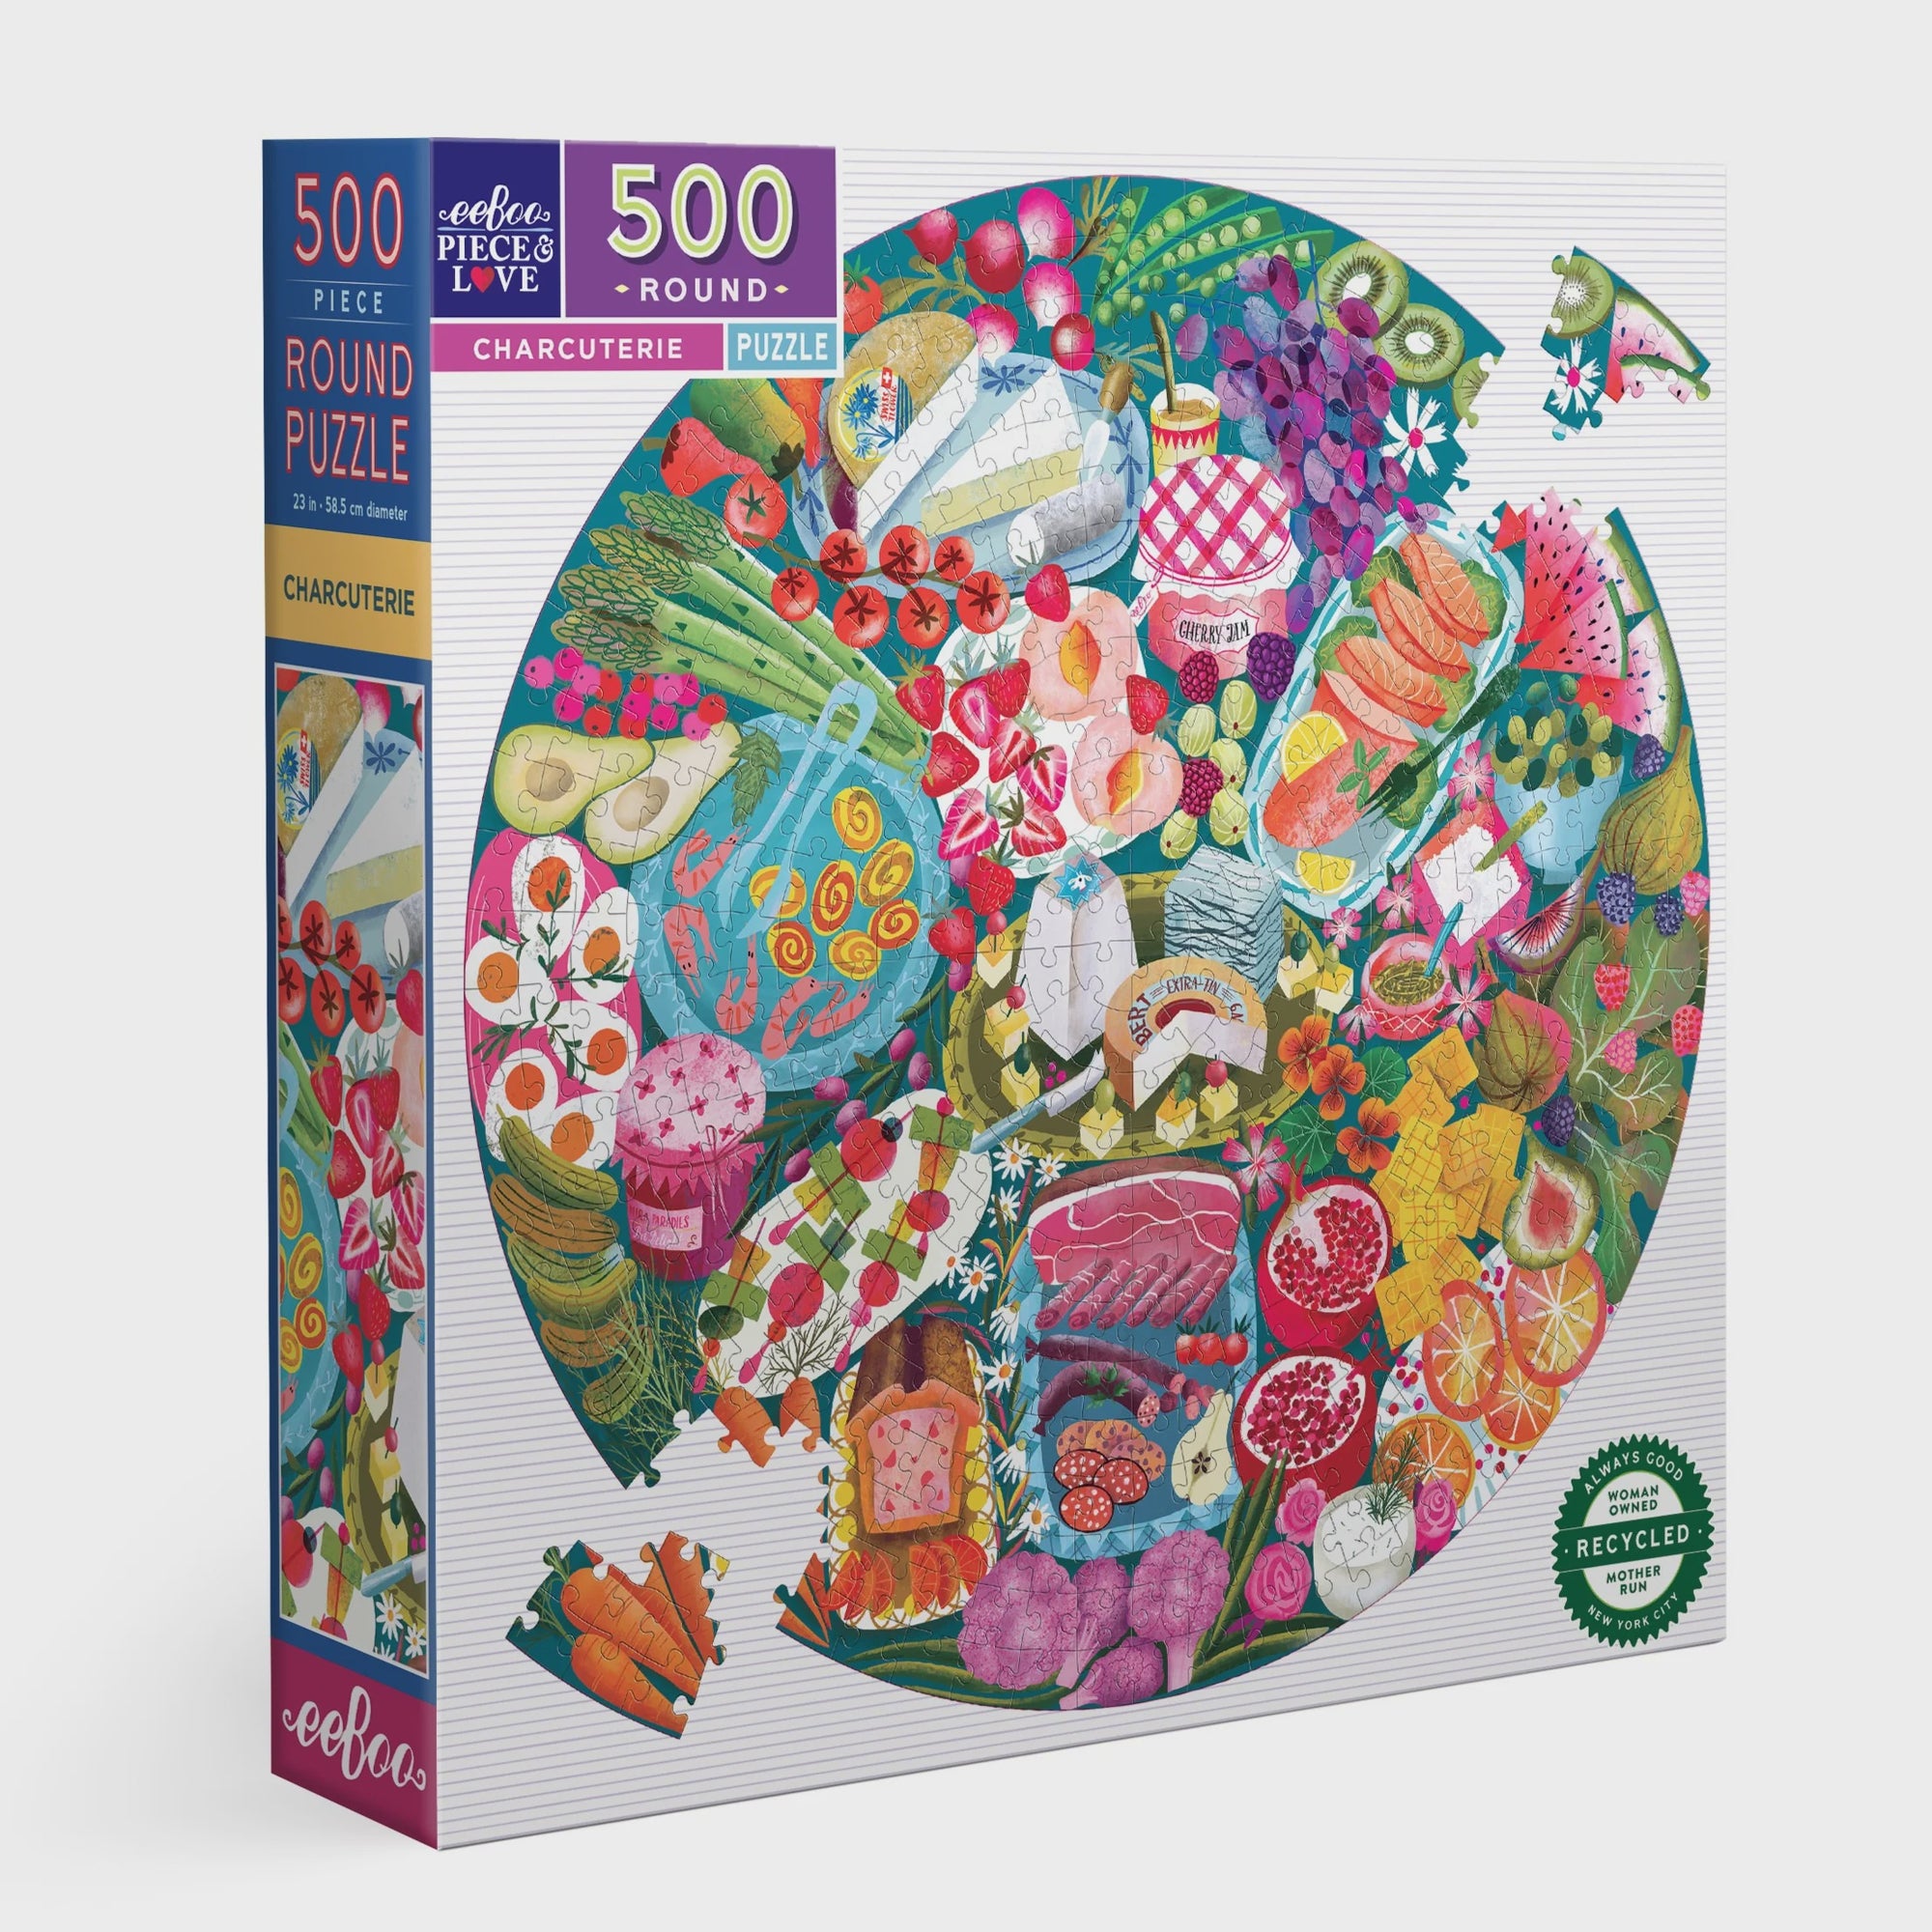 Eeboo Charcuterie Round Puzzle - 500 pc